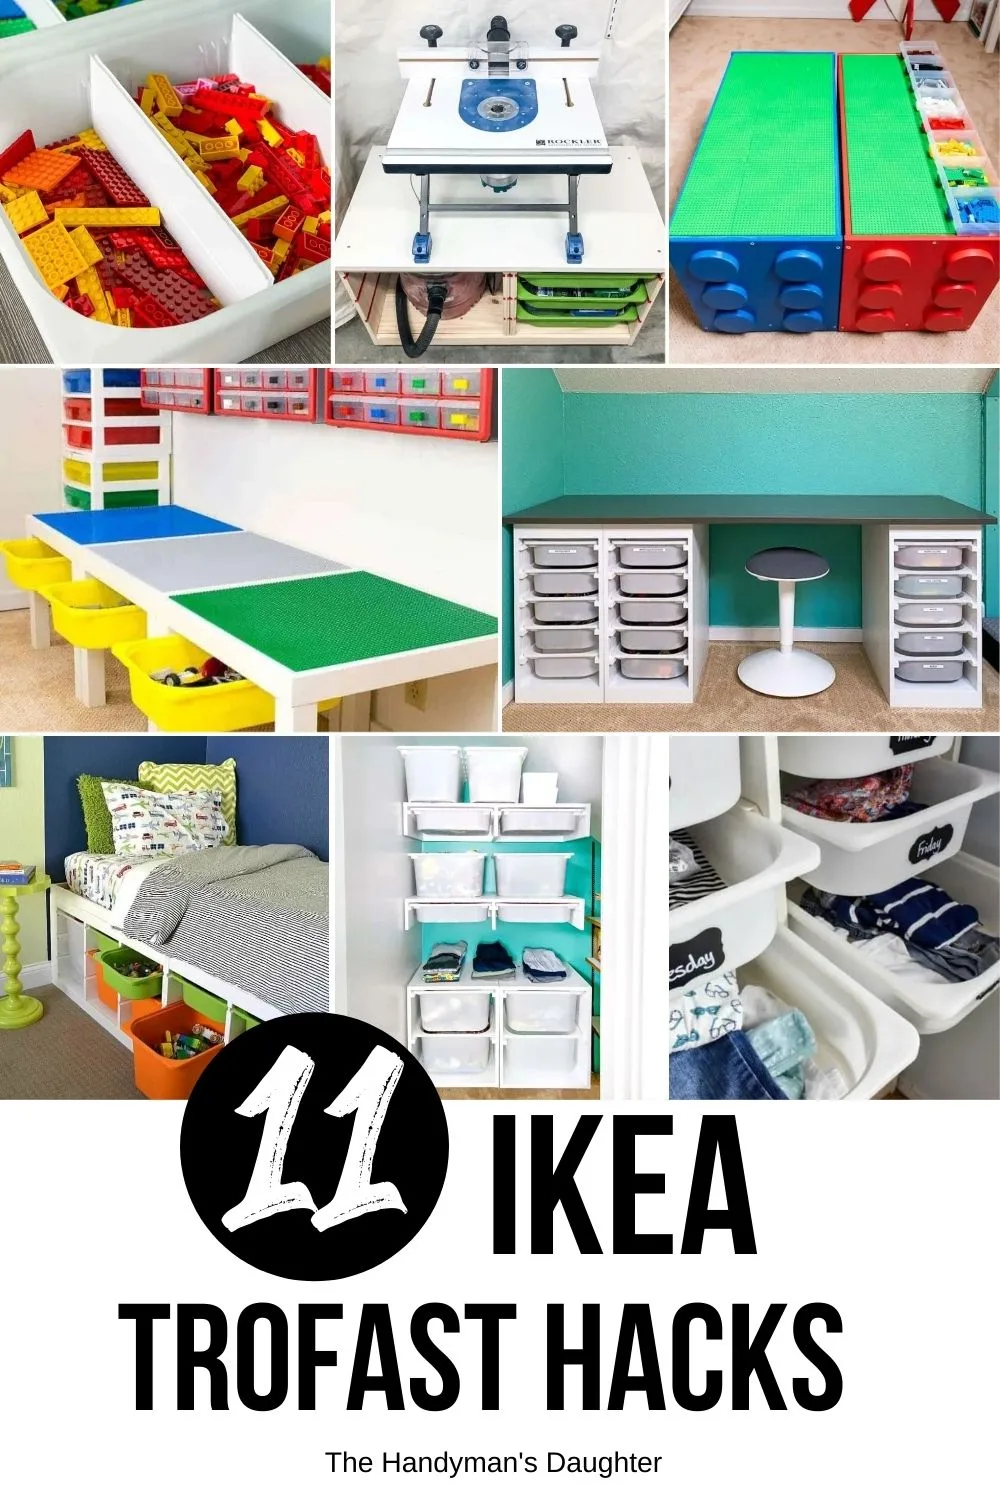 21 BEST IKEA Trofast Hacks To Stay Organized at Home!